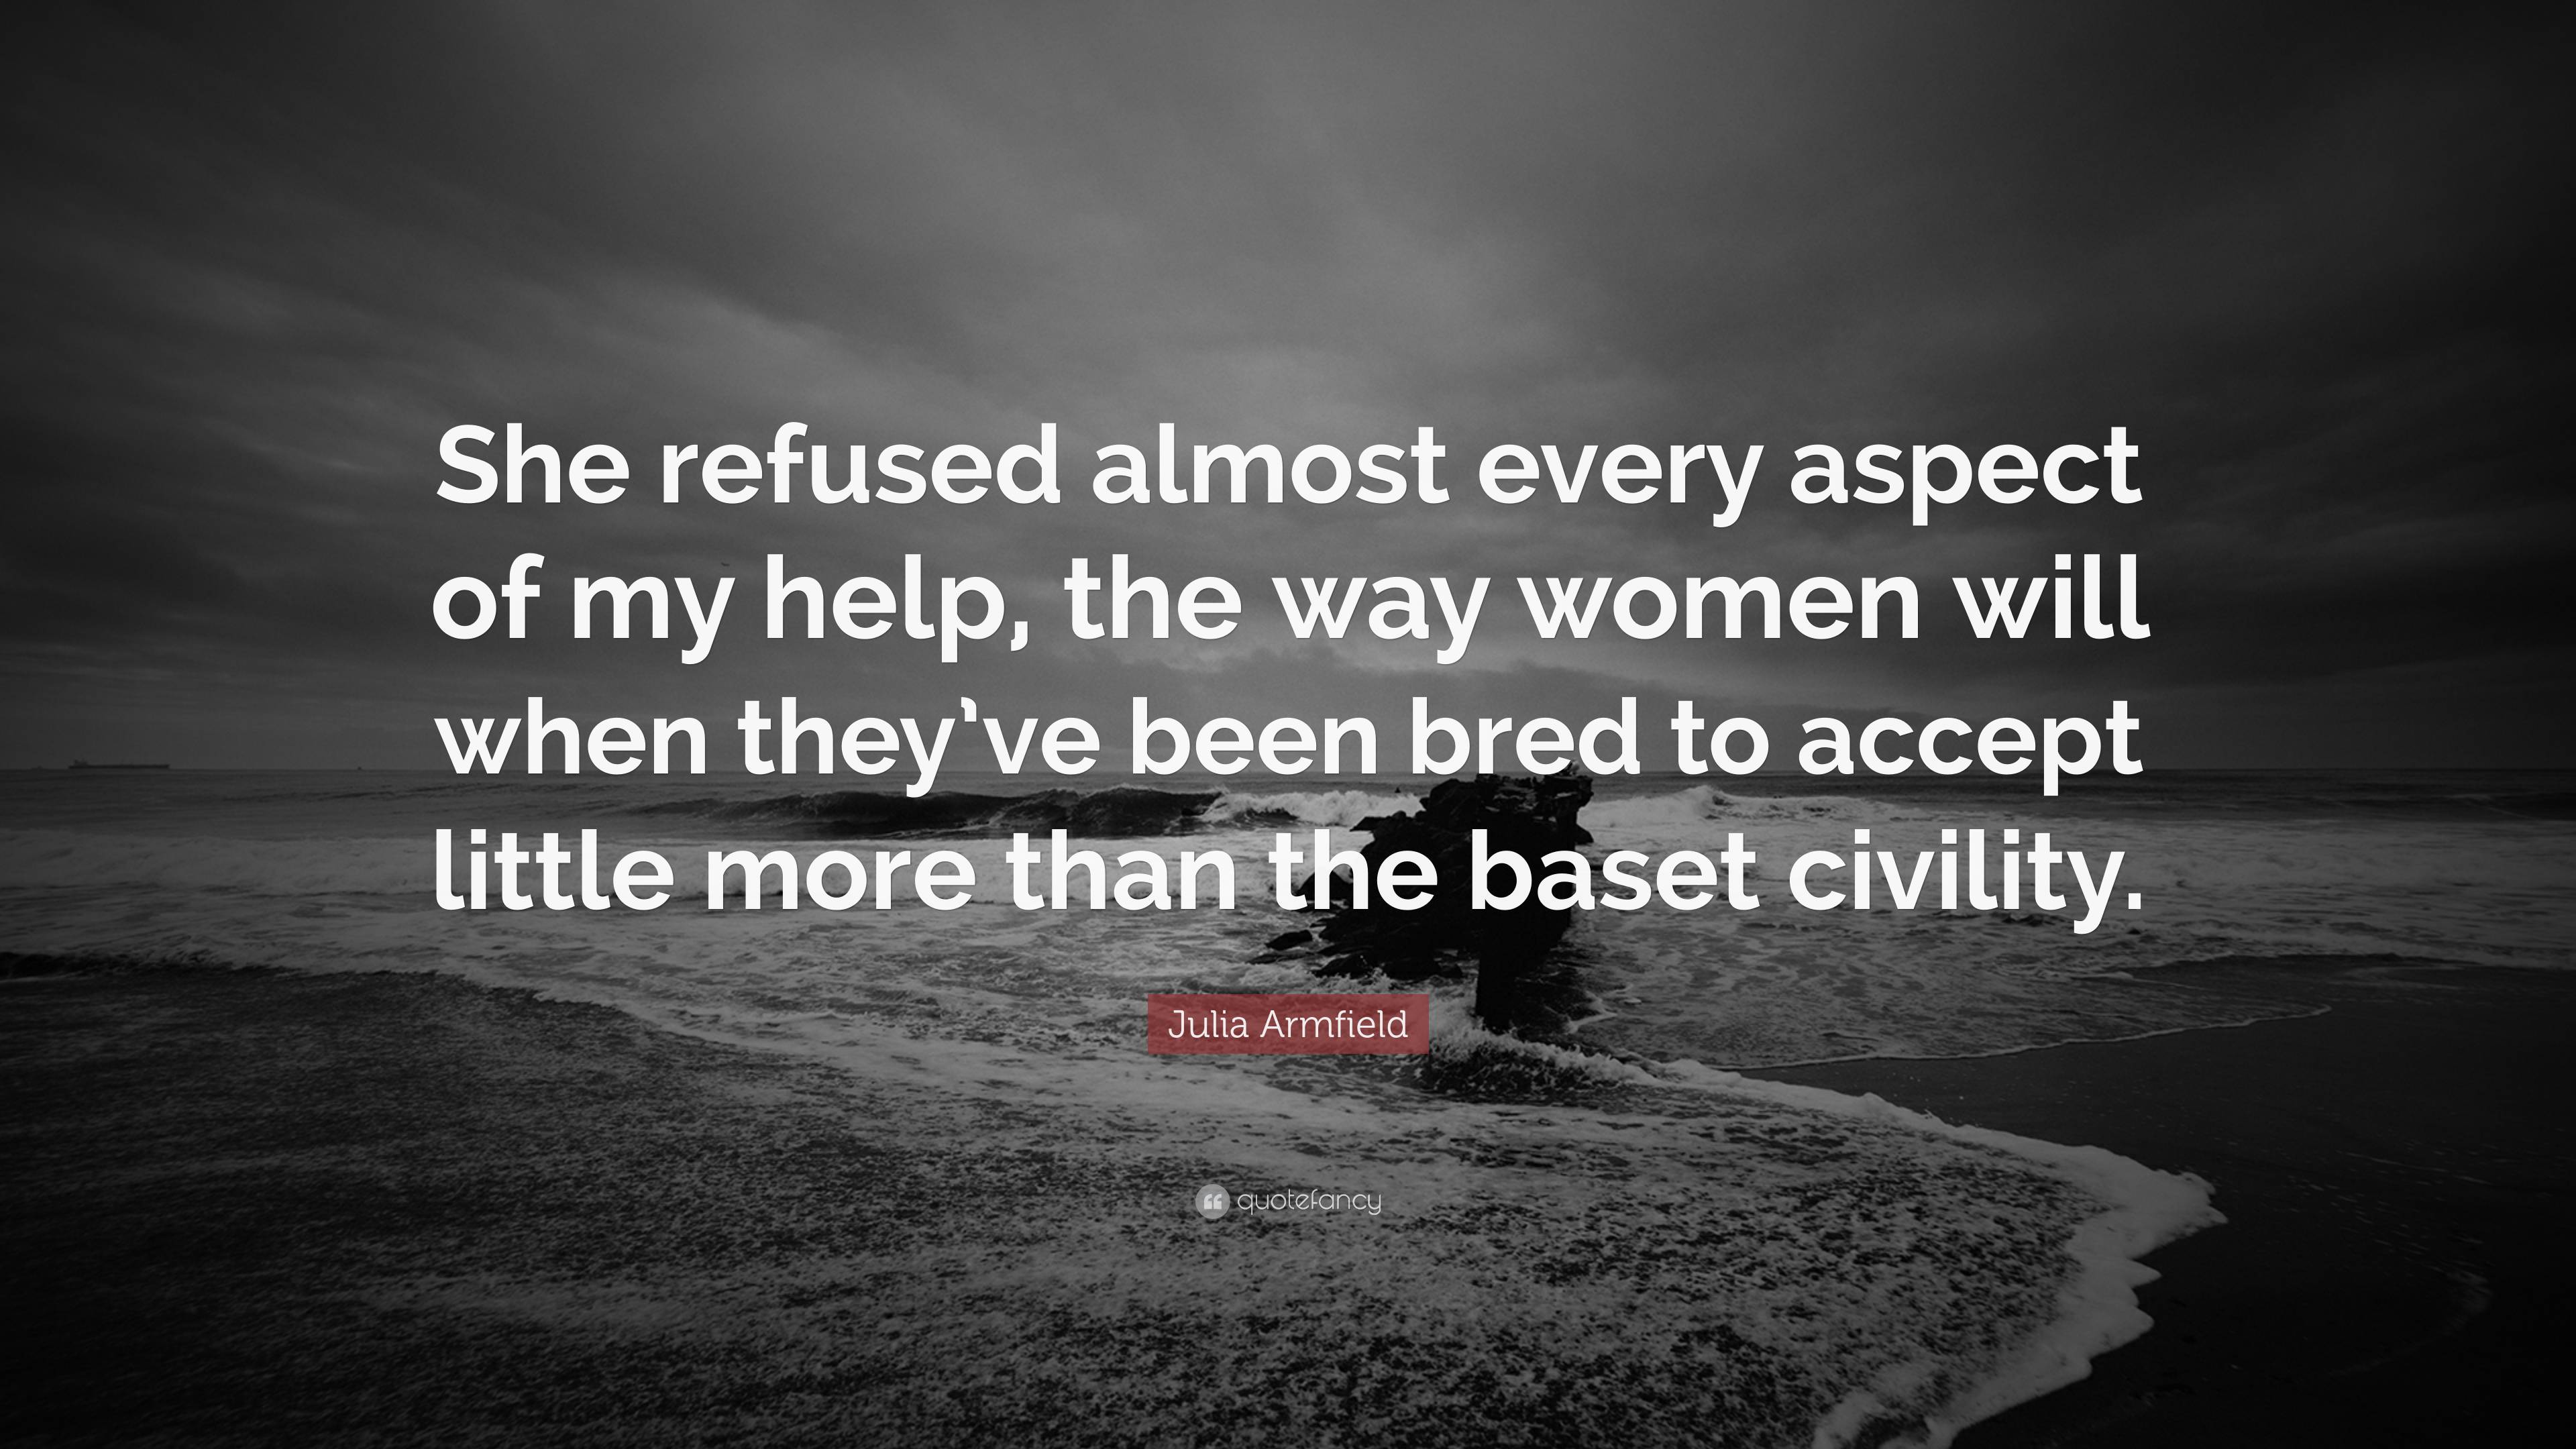 Julia Armfield Quote: “She refused almost every aspect of my help, the ...